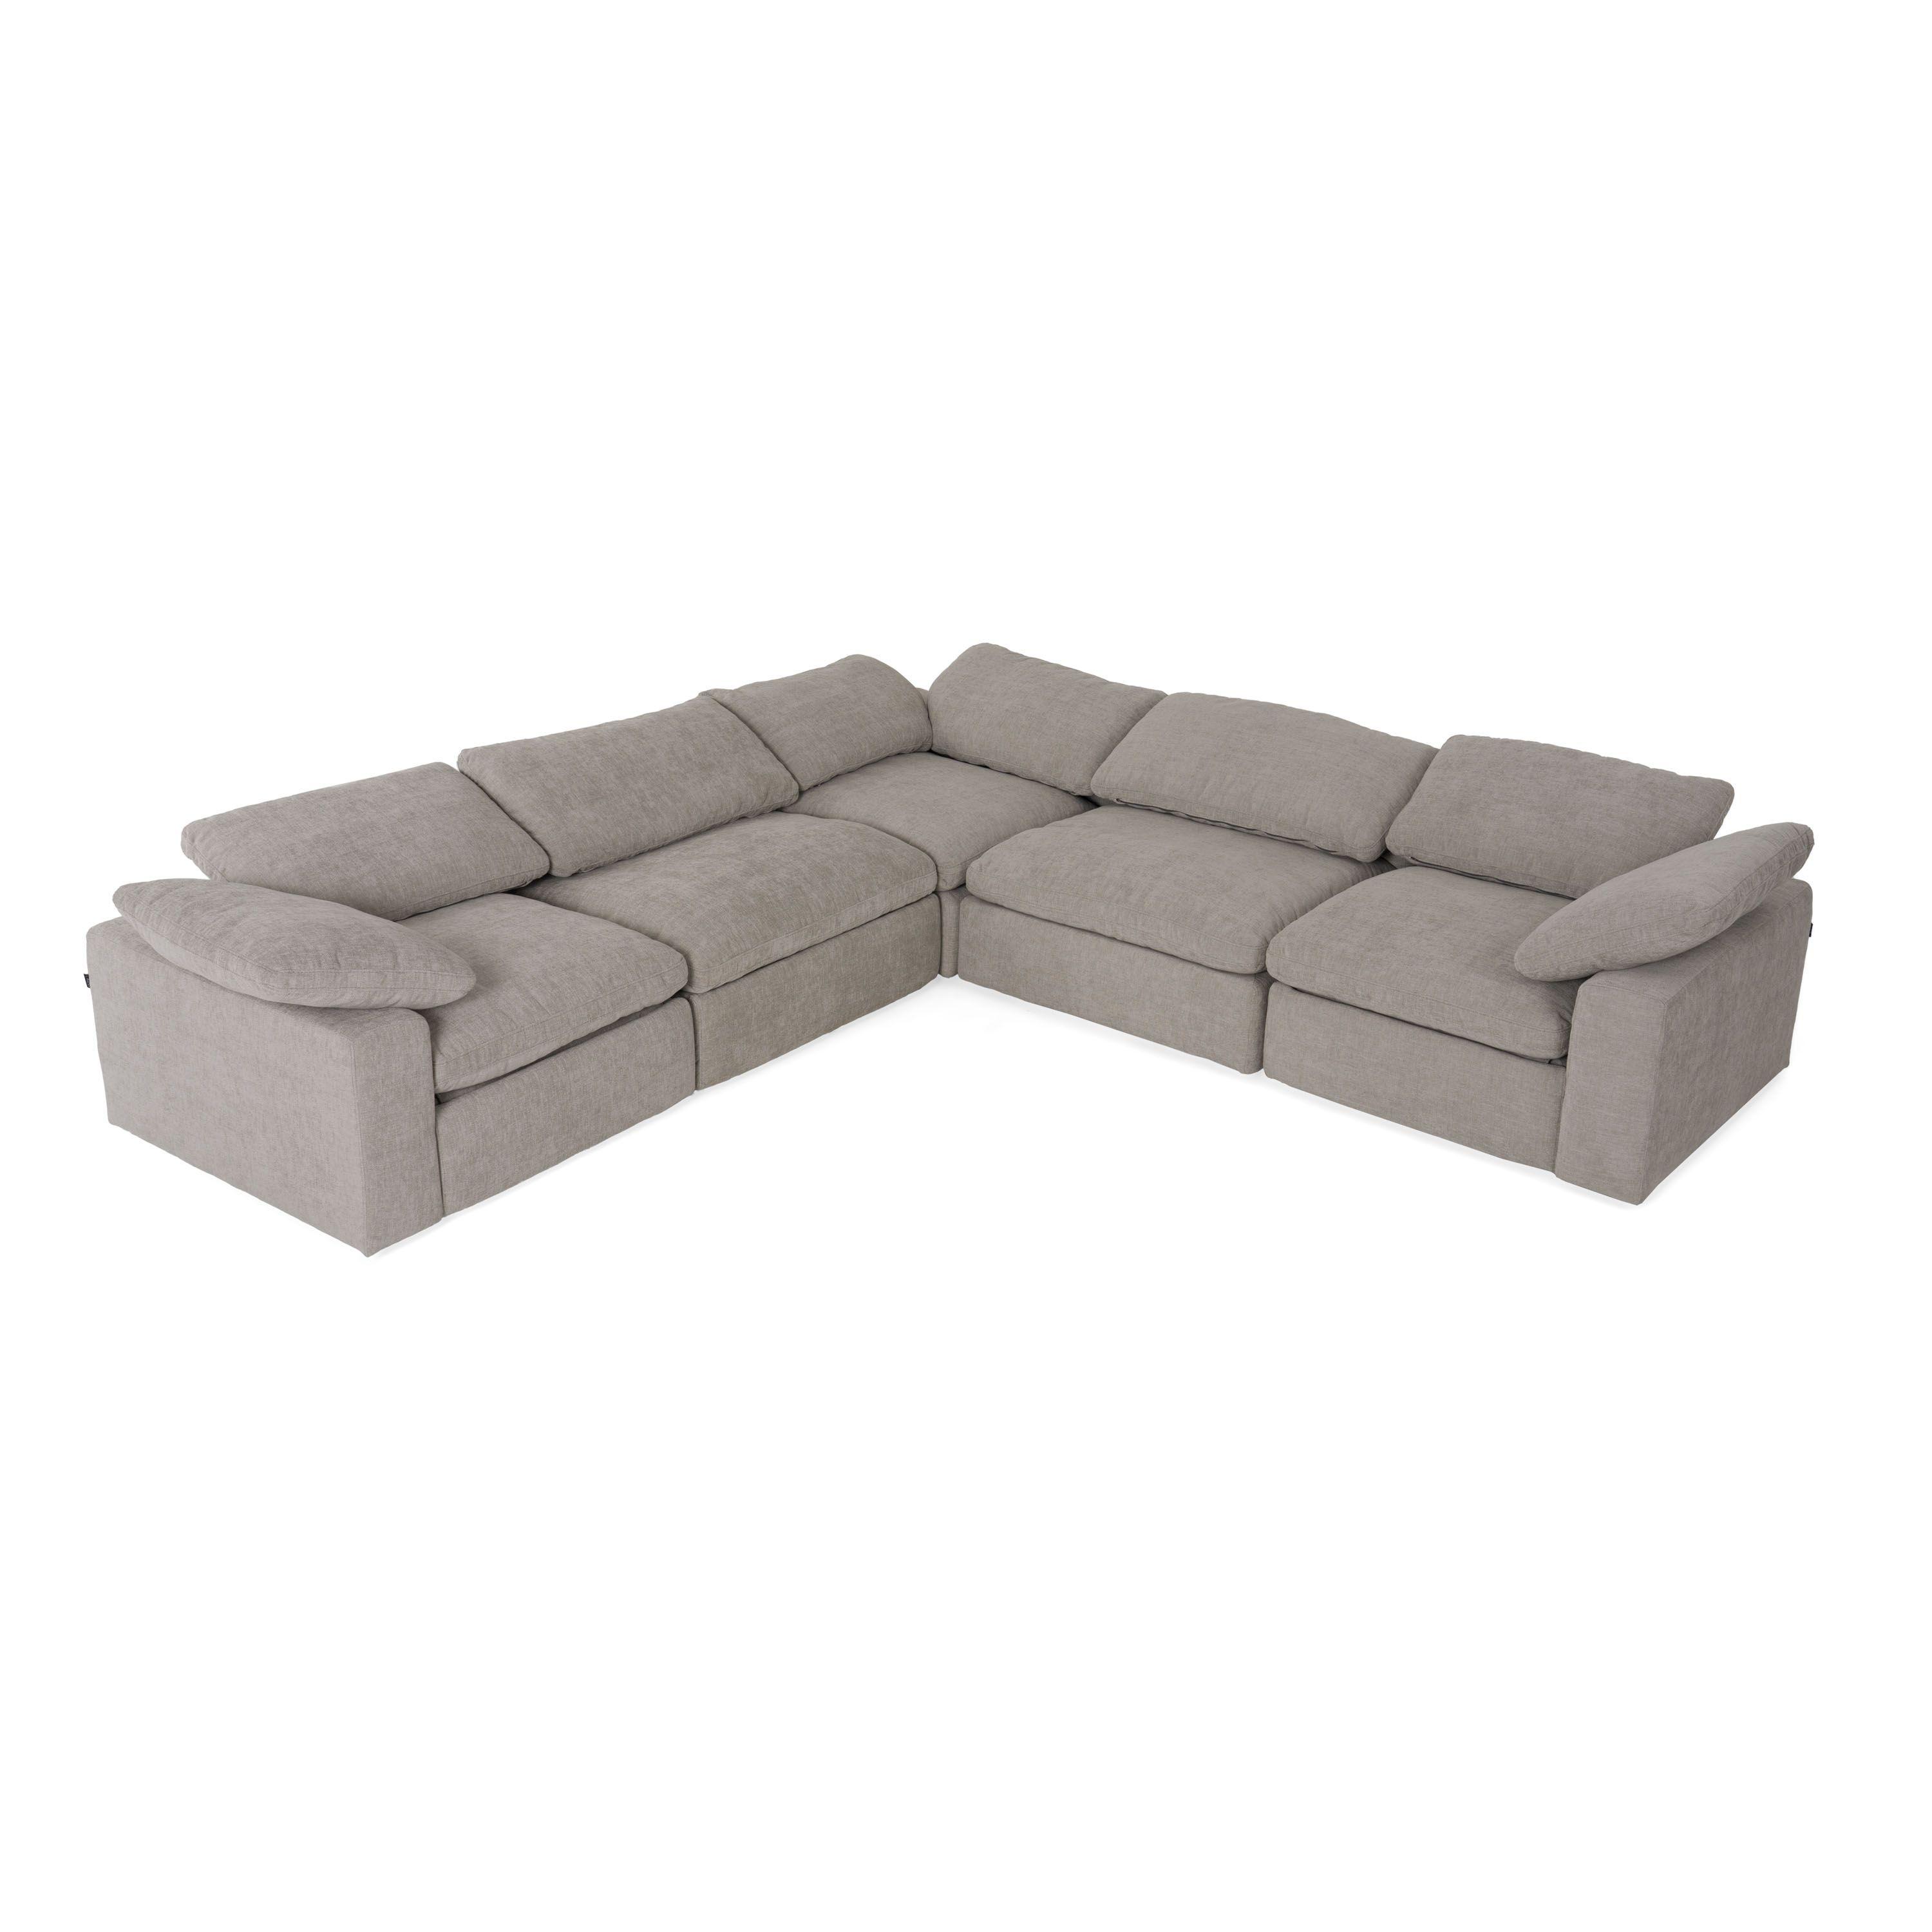 VIG Furniture Corinth Reclining Sectional Sofa VGKM-KM.920-GRY Reclining Sectional